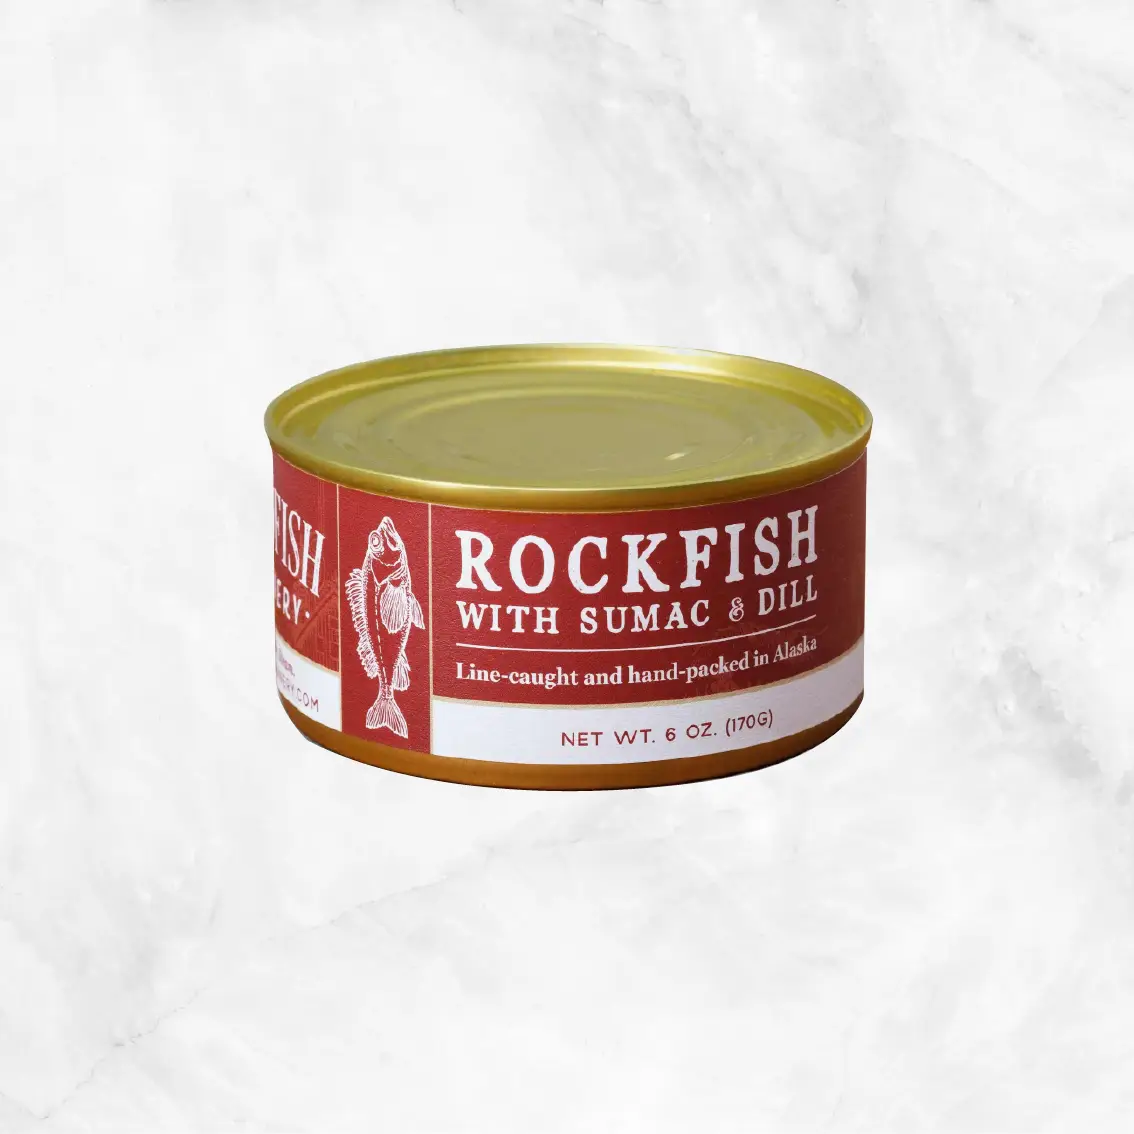 Rockfish in Sumac & Dill Delivery